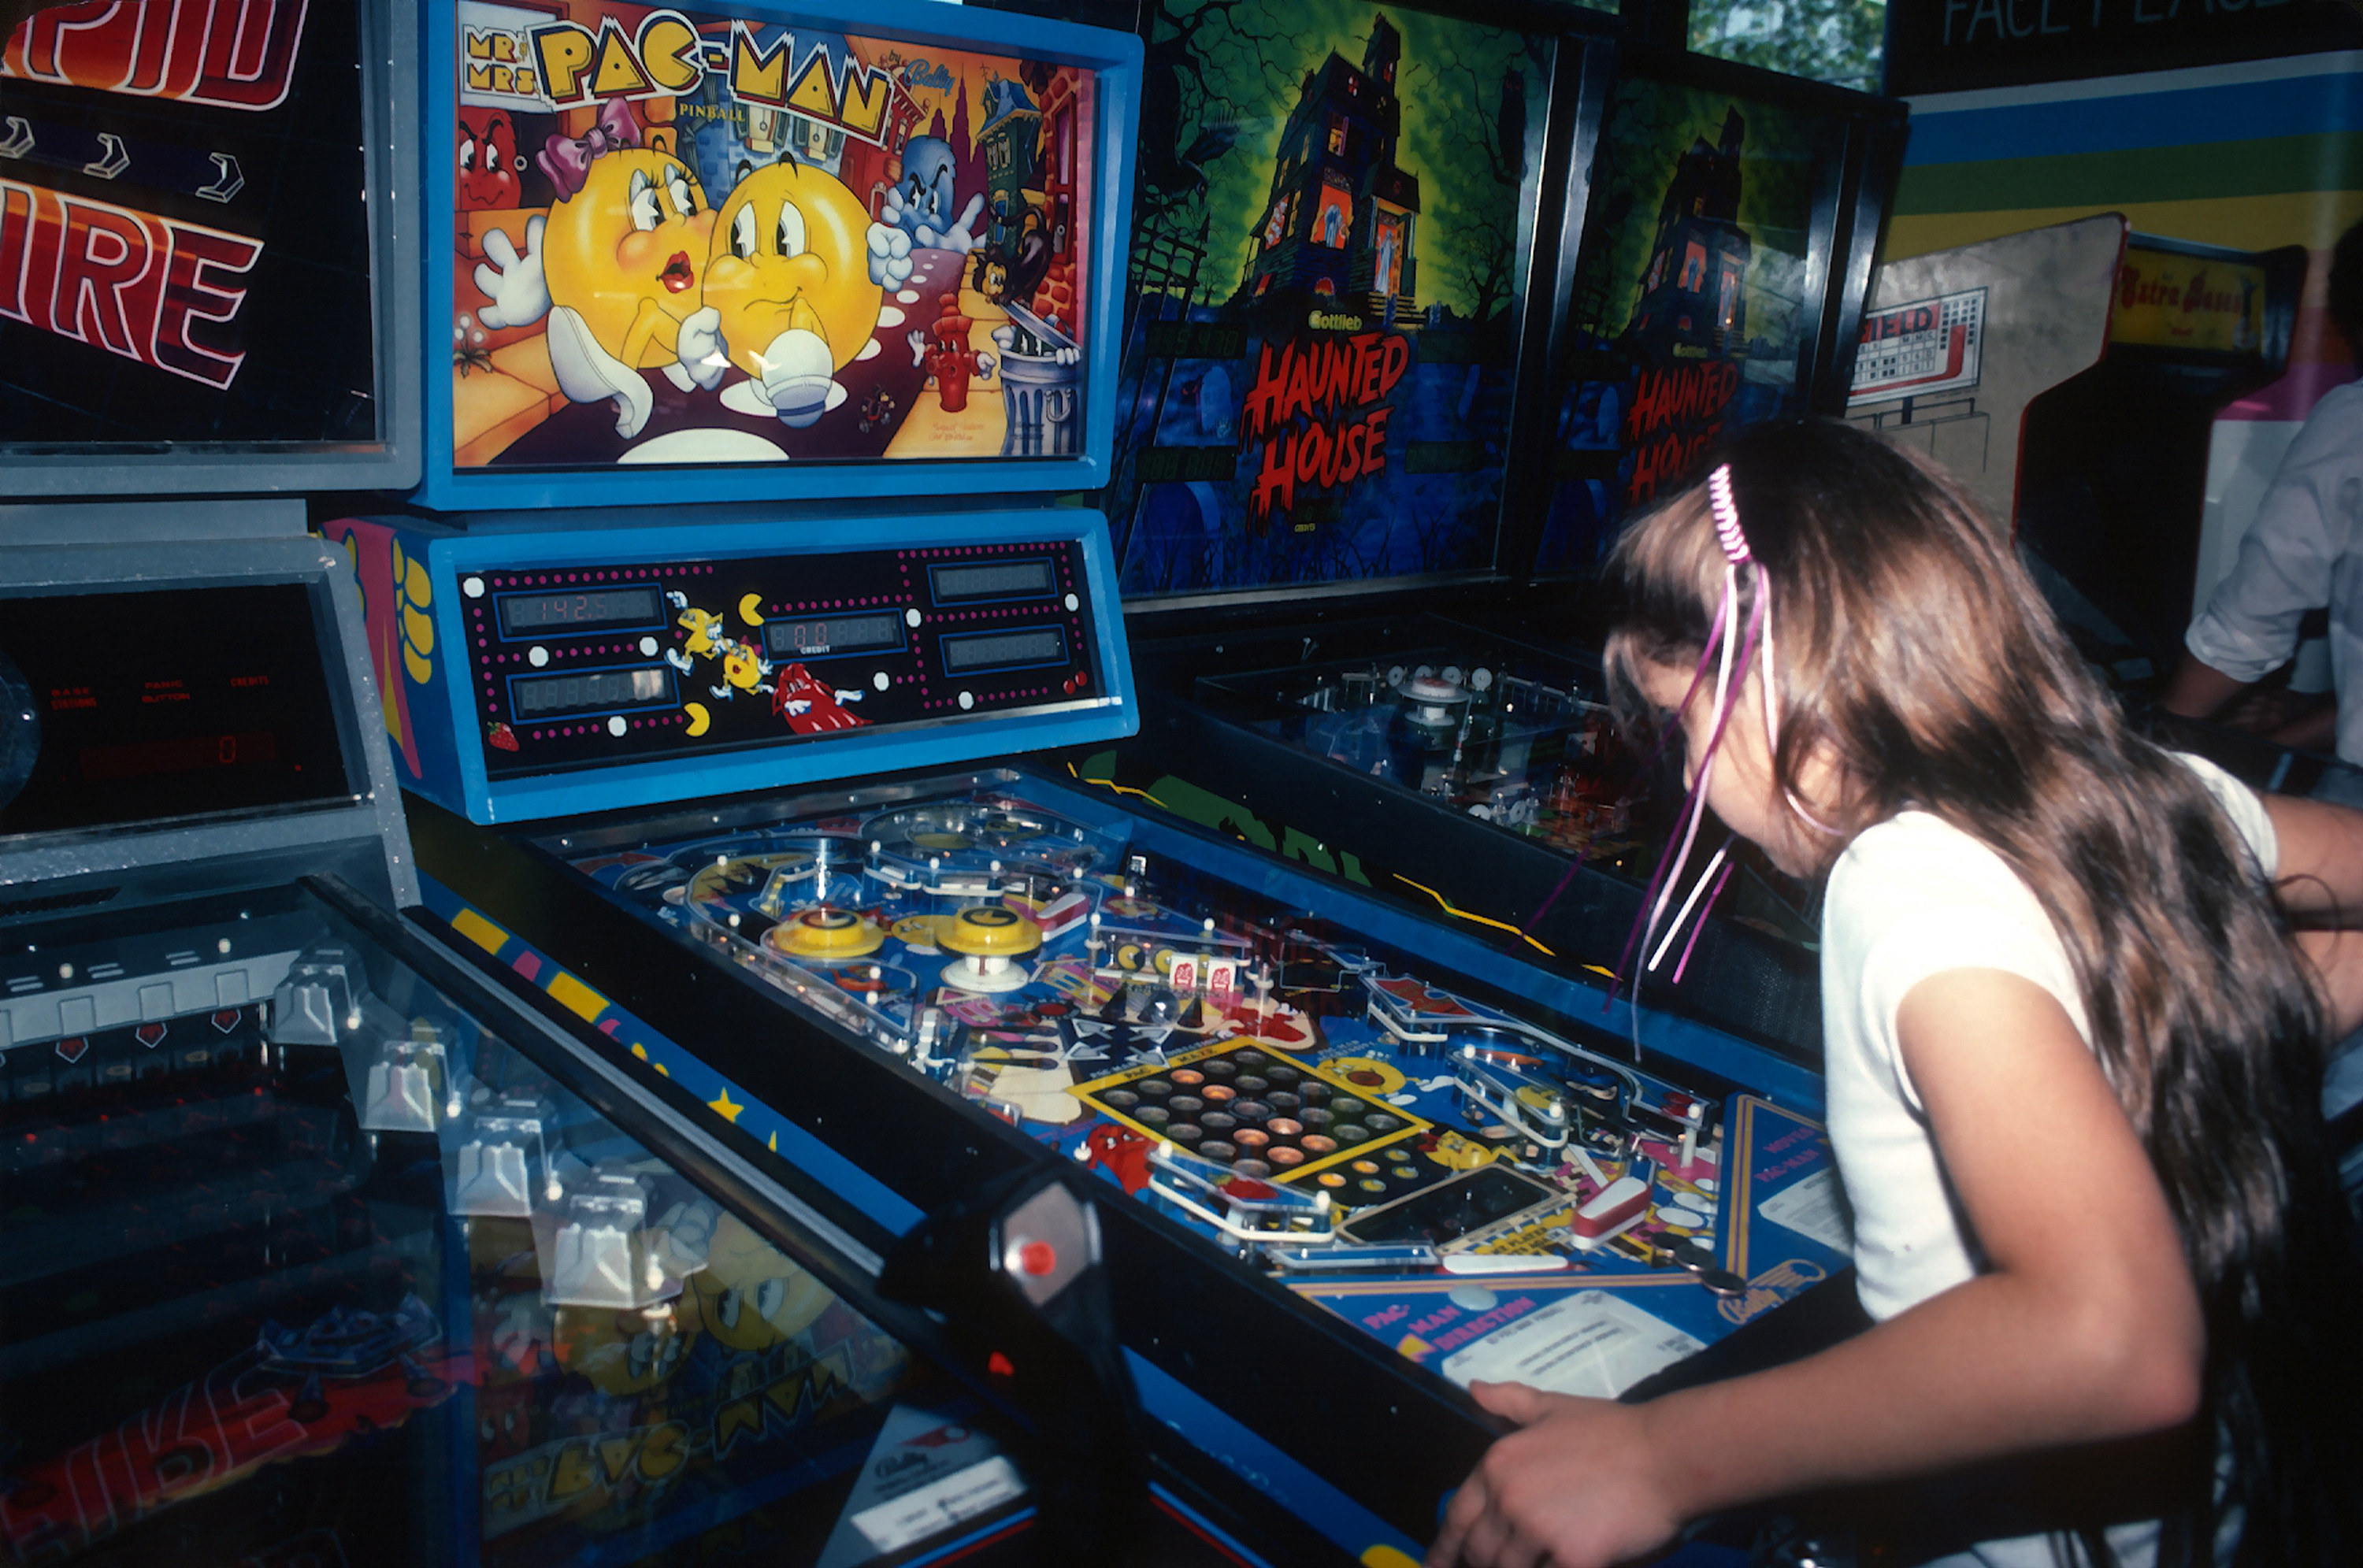 A young girl plays Pac-Man at an arcade in Times Square circa 1982